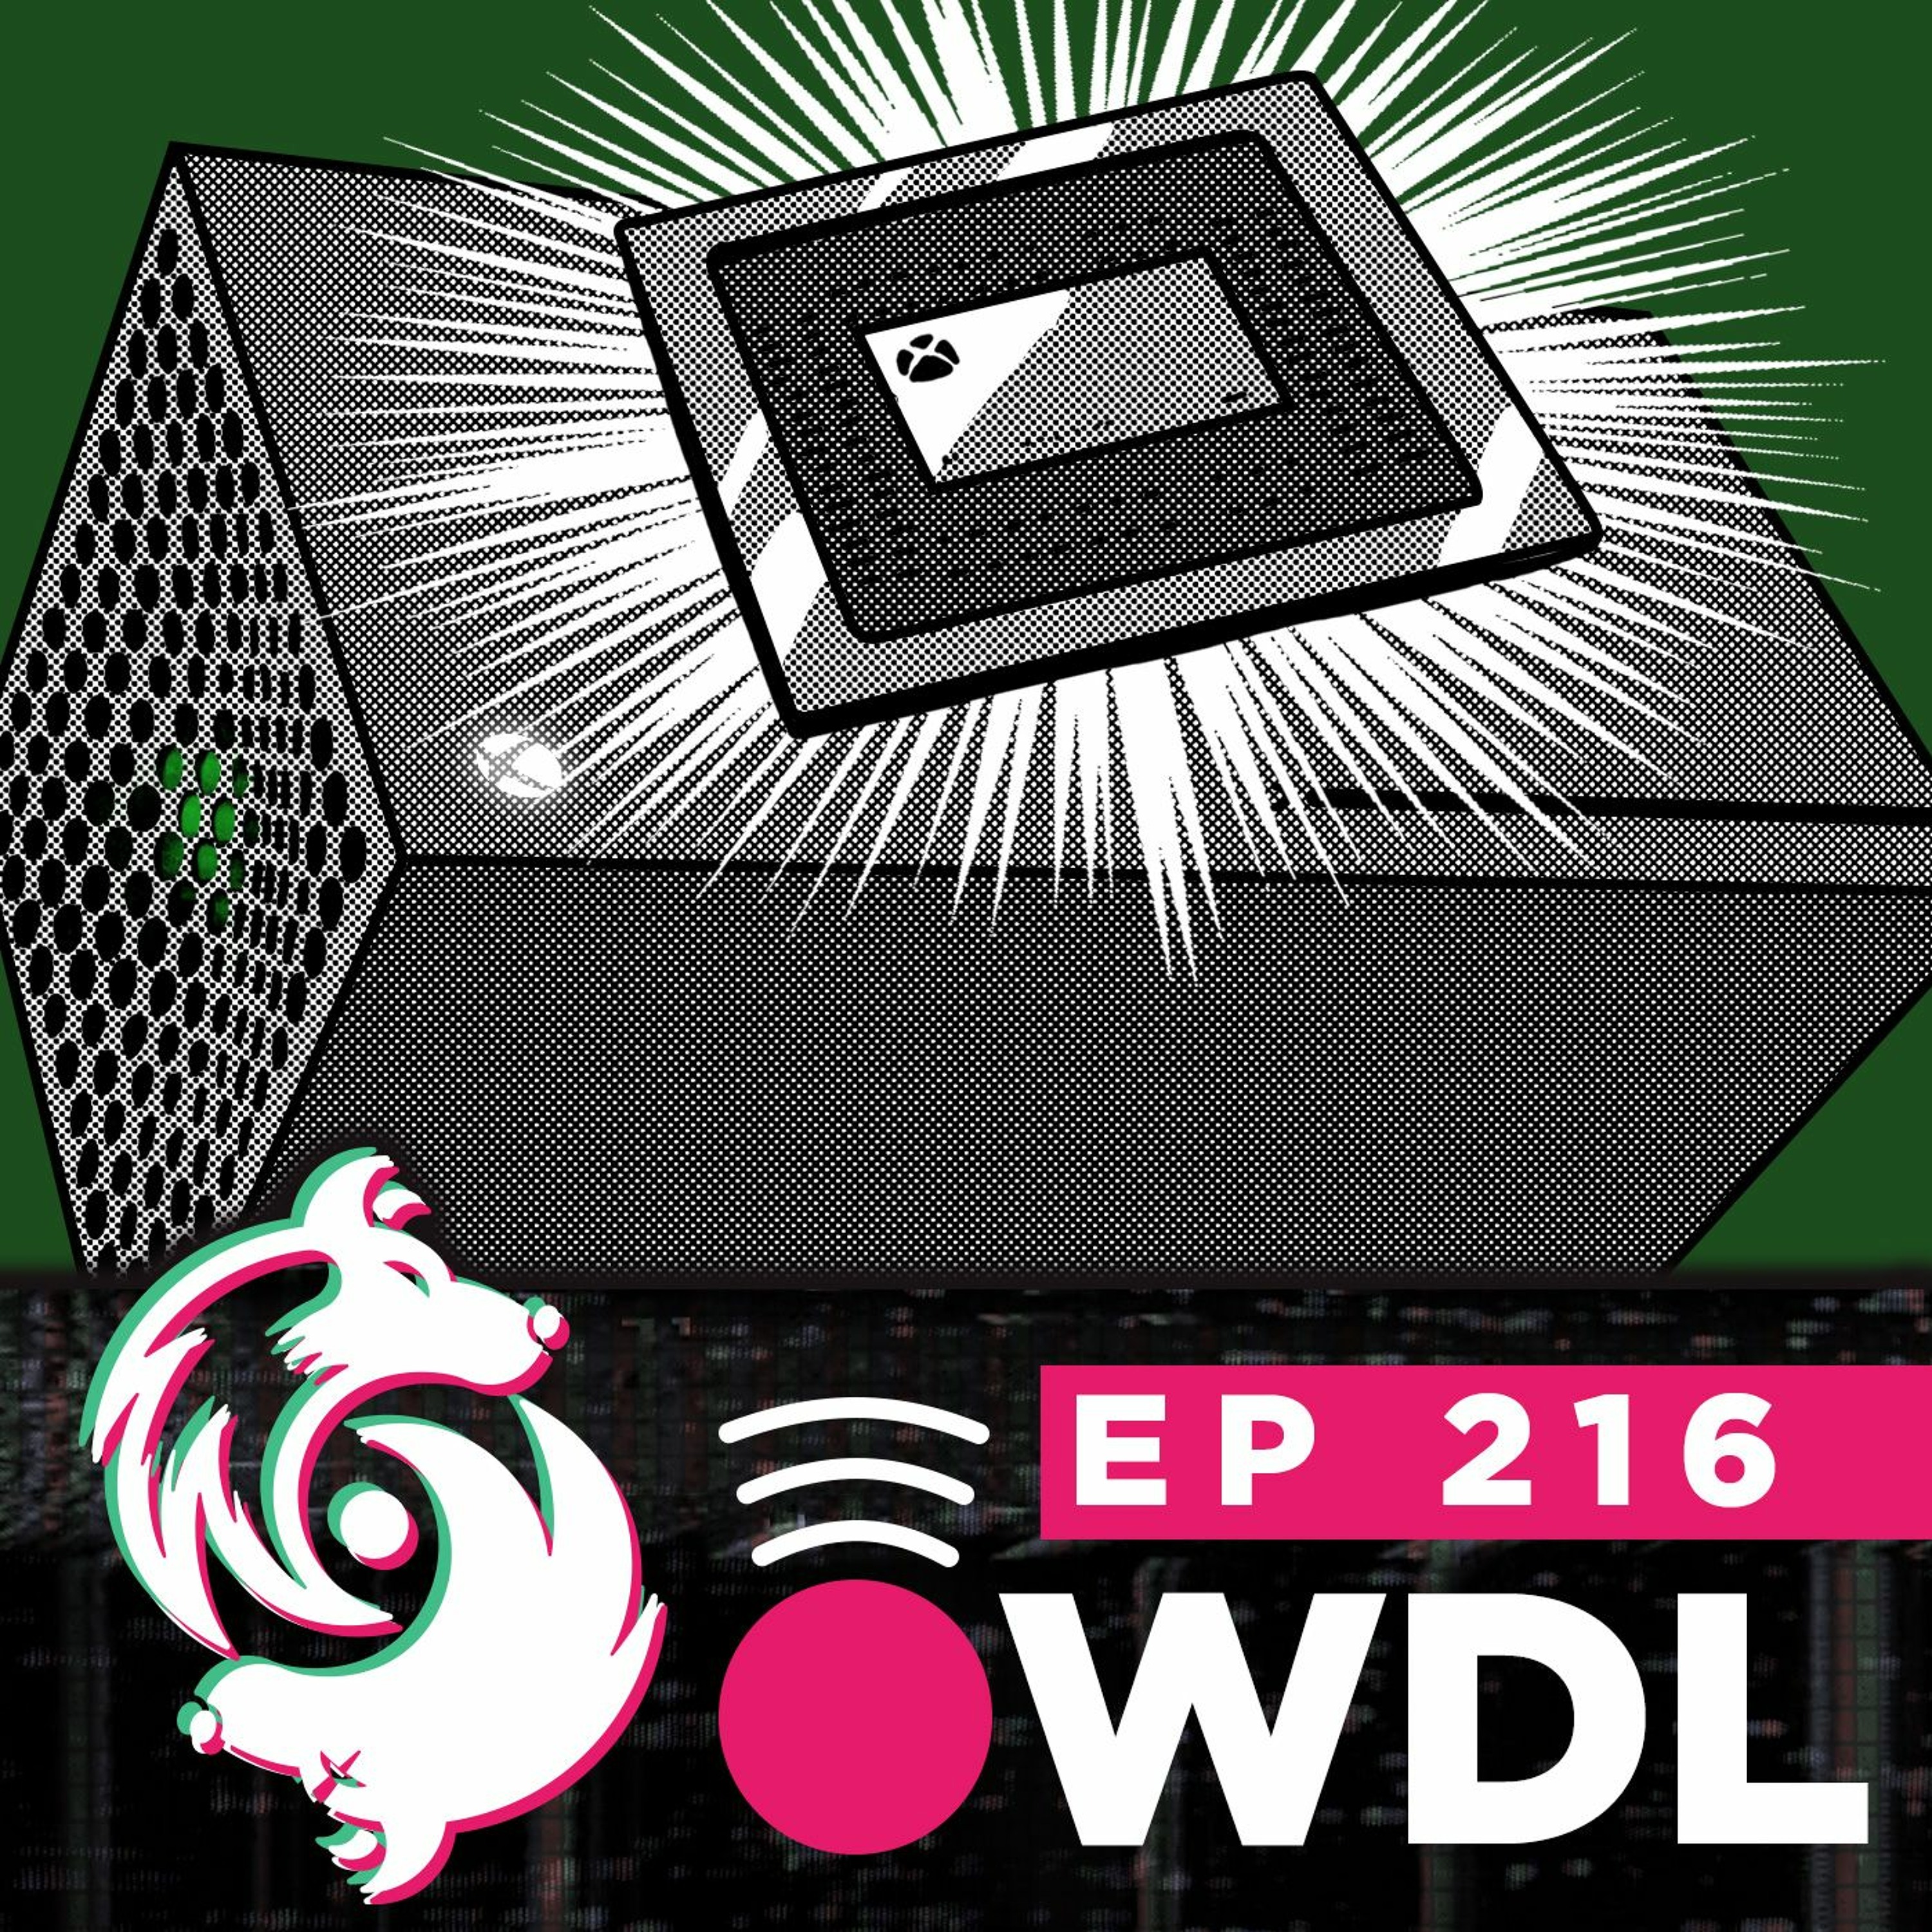 Xbox Series X Technical Specs and what they mean - WDL Ep 216